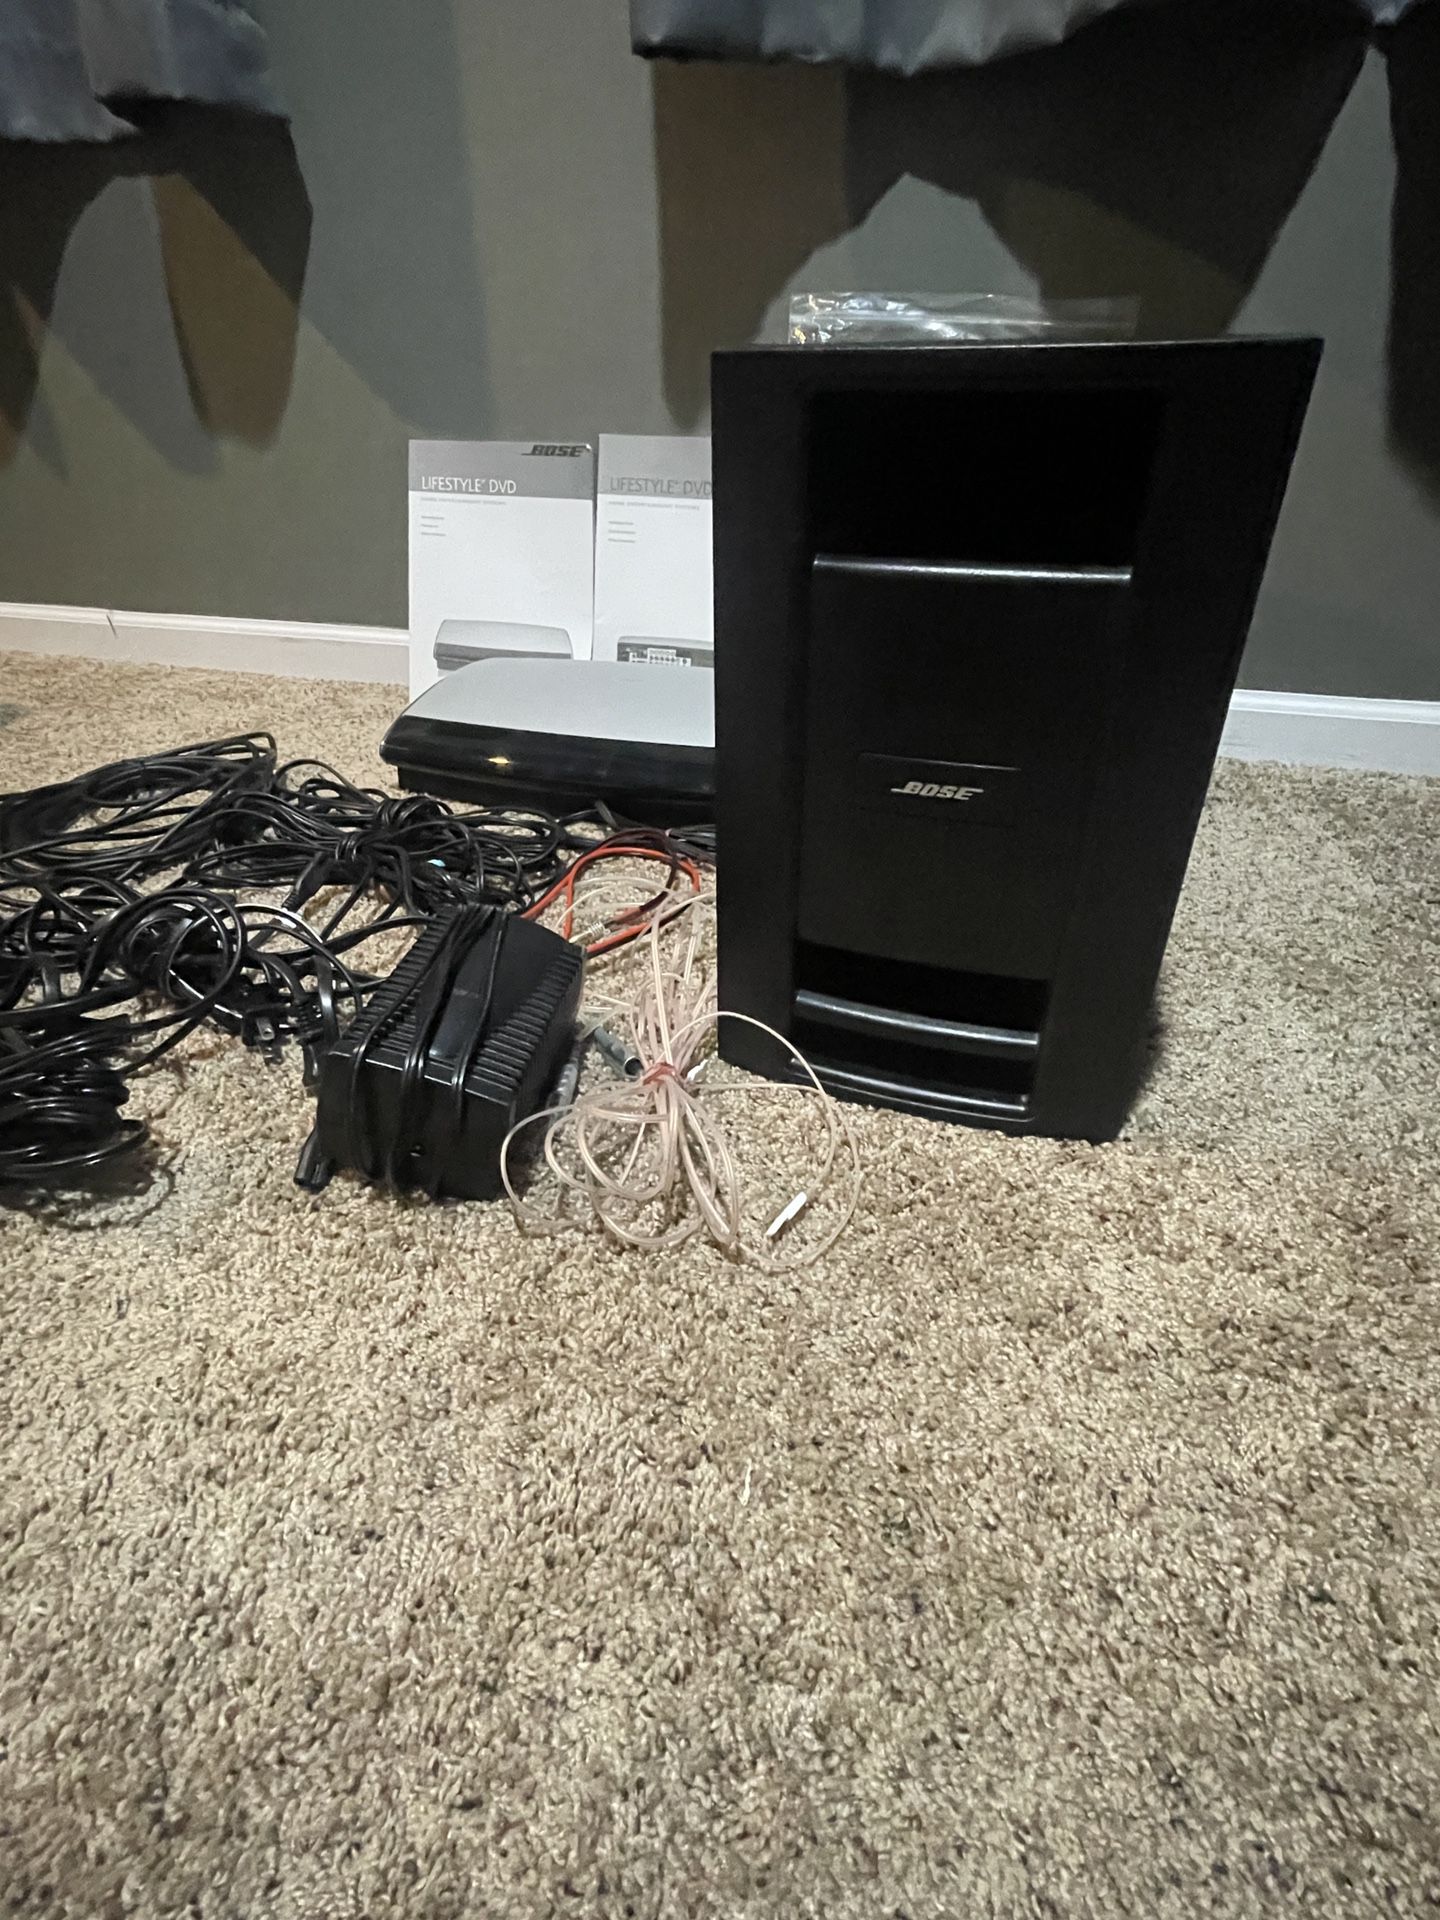 Bose Lifestyle III 5.1 Home Theater System 